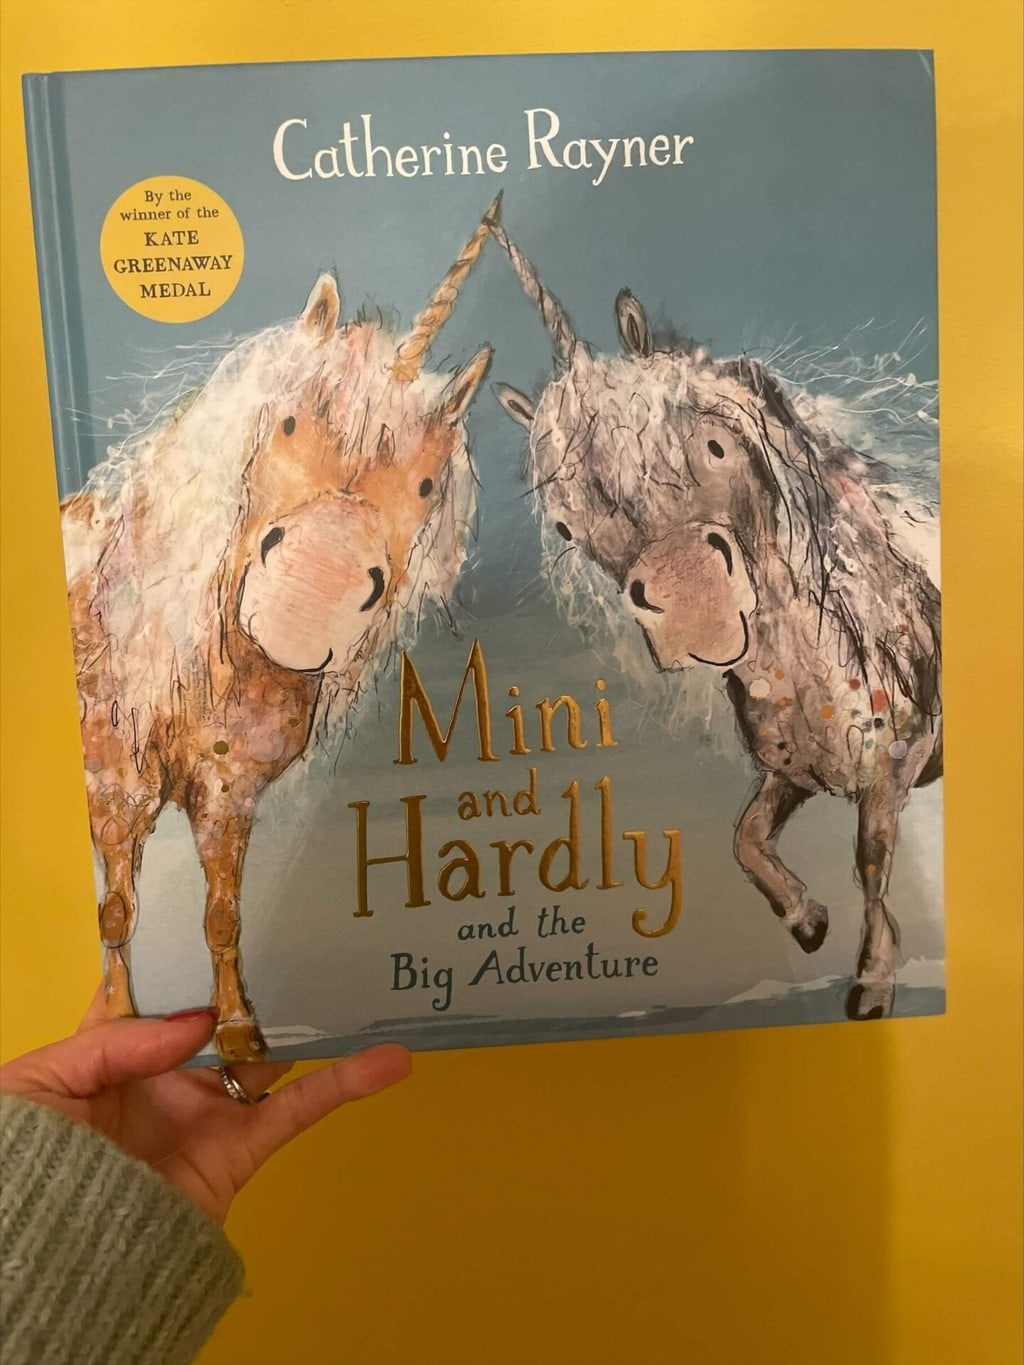 ni and Hardly and the Big Adventure – Catherine Rayner (author and illustrator), Macmillan Children’s Books (publisher)